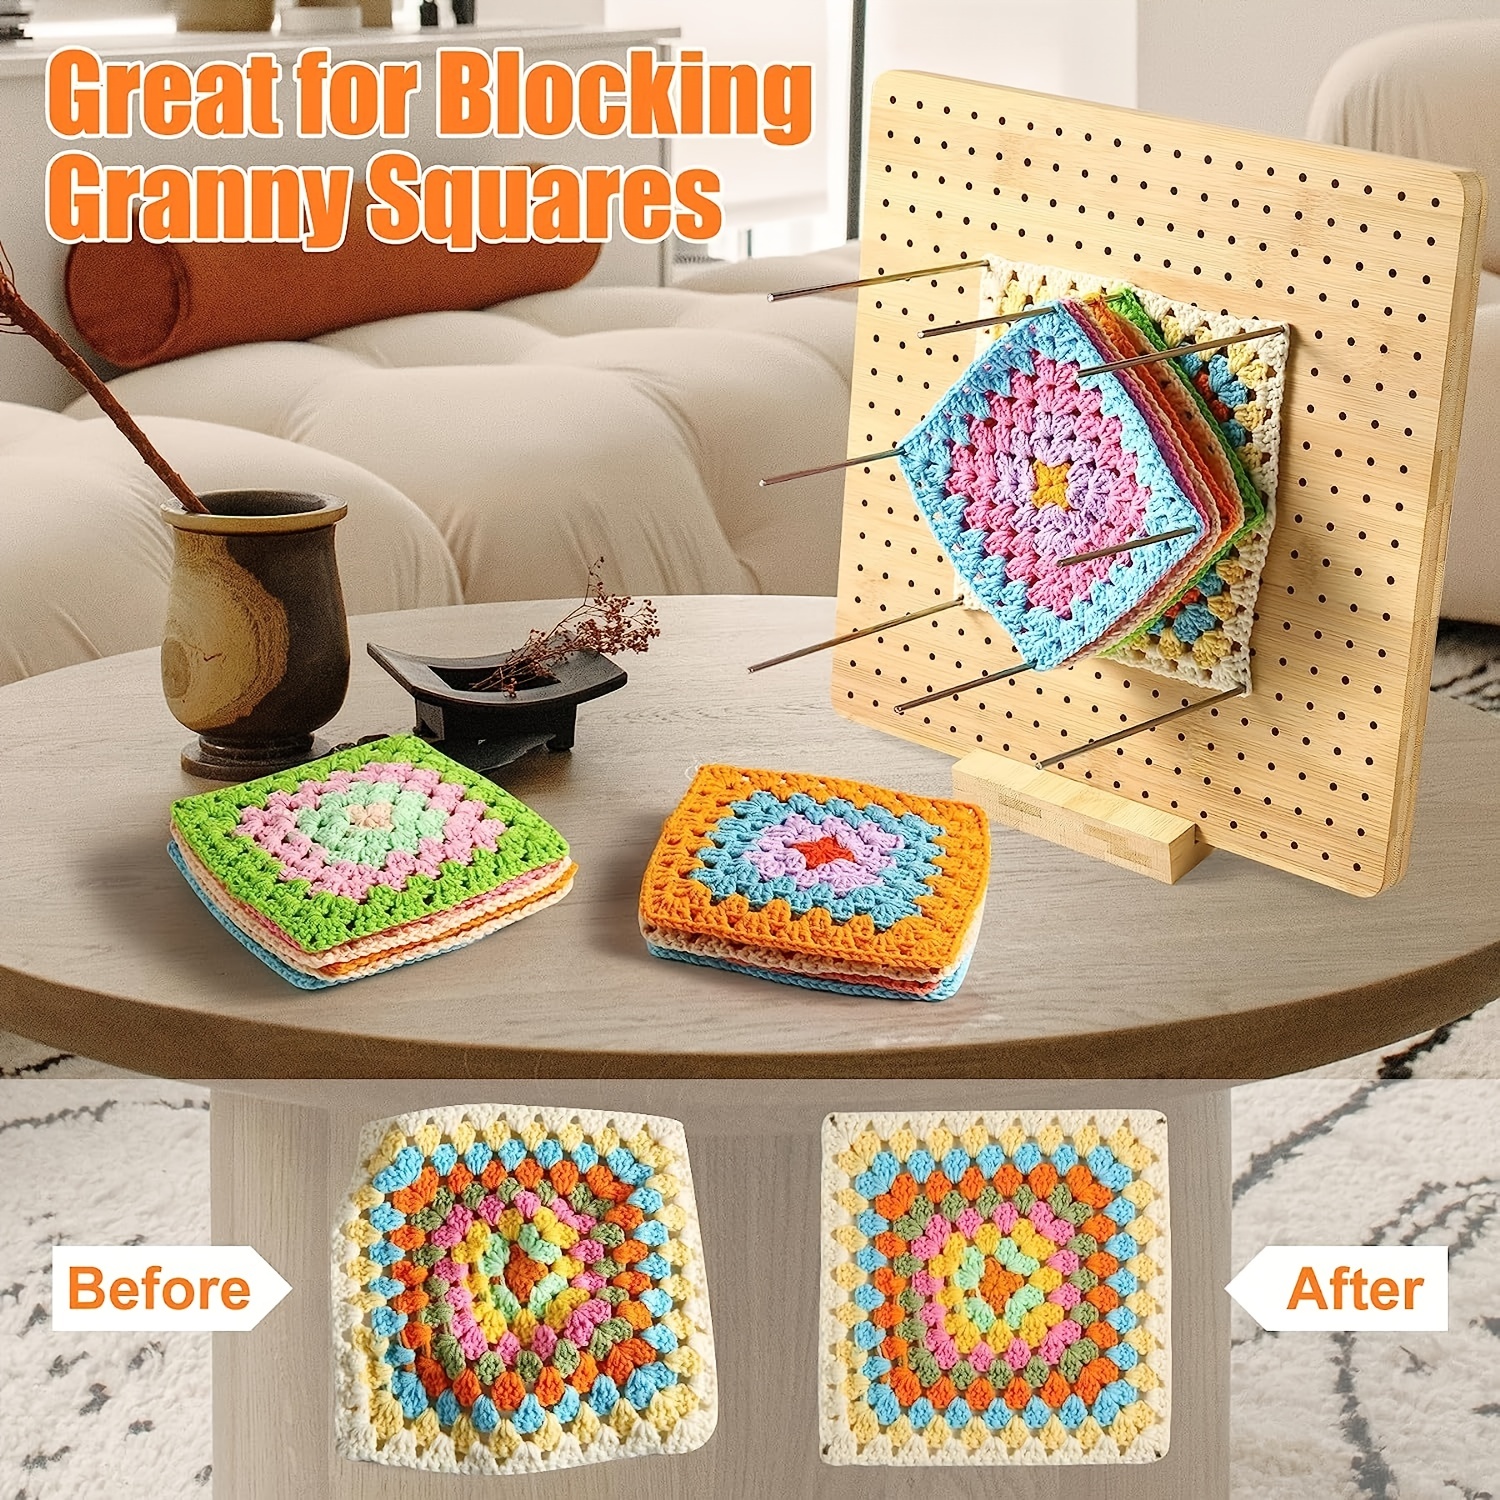 Sure, I'm in the middle of a project- but forget that, it's granny square  time! Got my new blocking board today lol. Now to Joann! : r/crochet